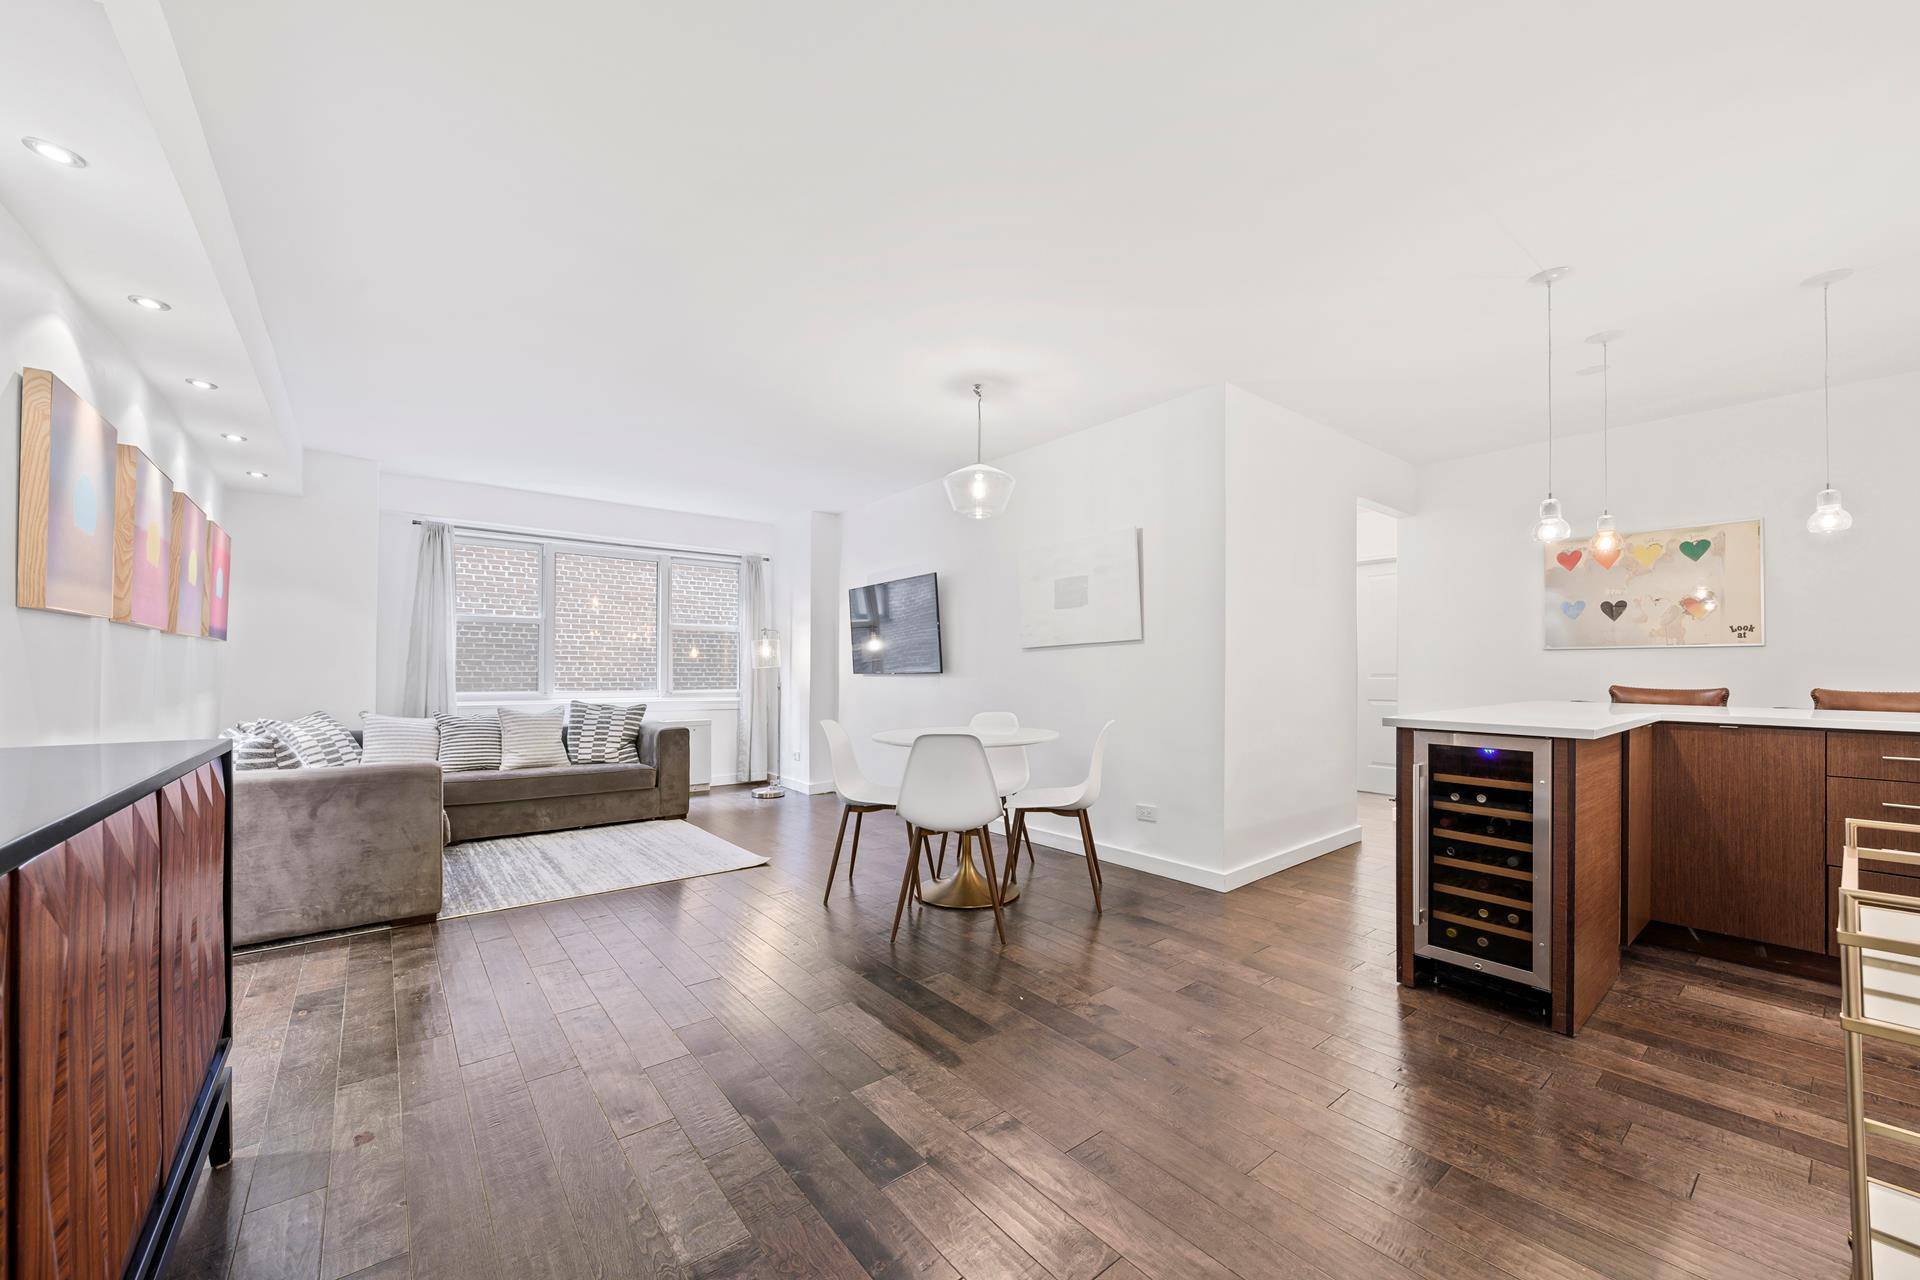 Enjoy living in this spacious, gorgeously renovated true 2 bedroom 2 full bathroom apartment located in the John Adams, the West Village's premier full service co op.